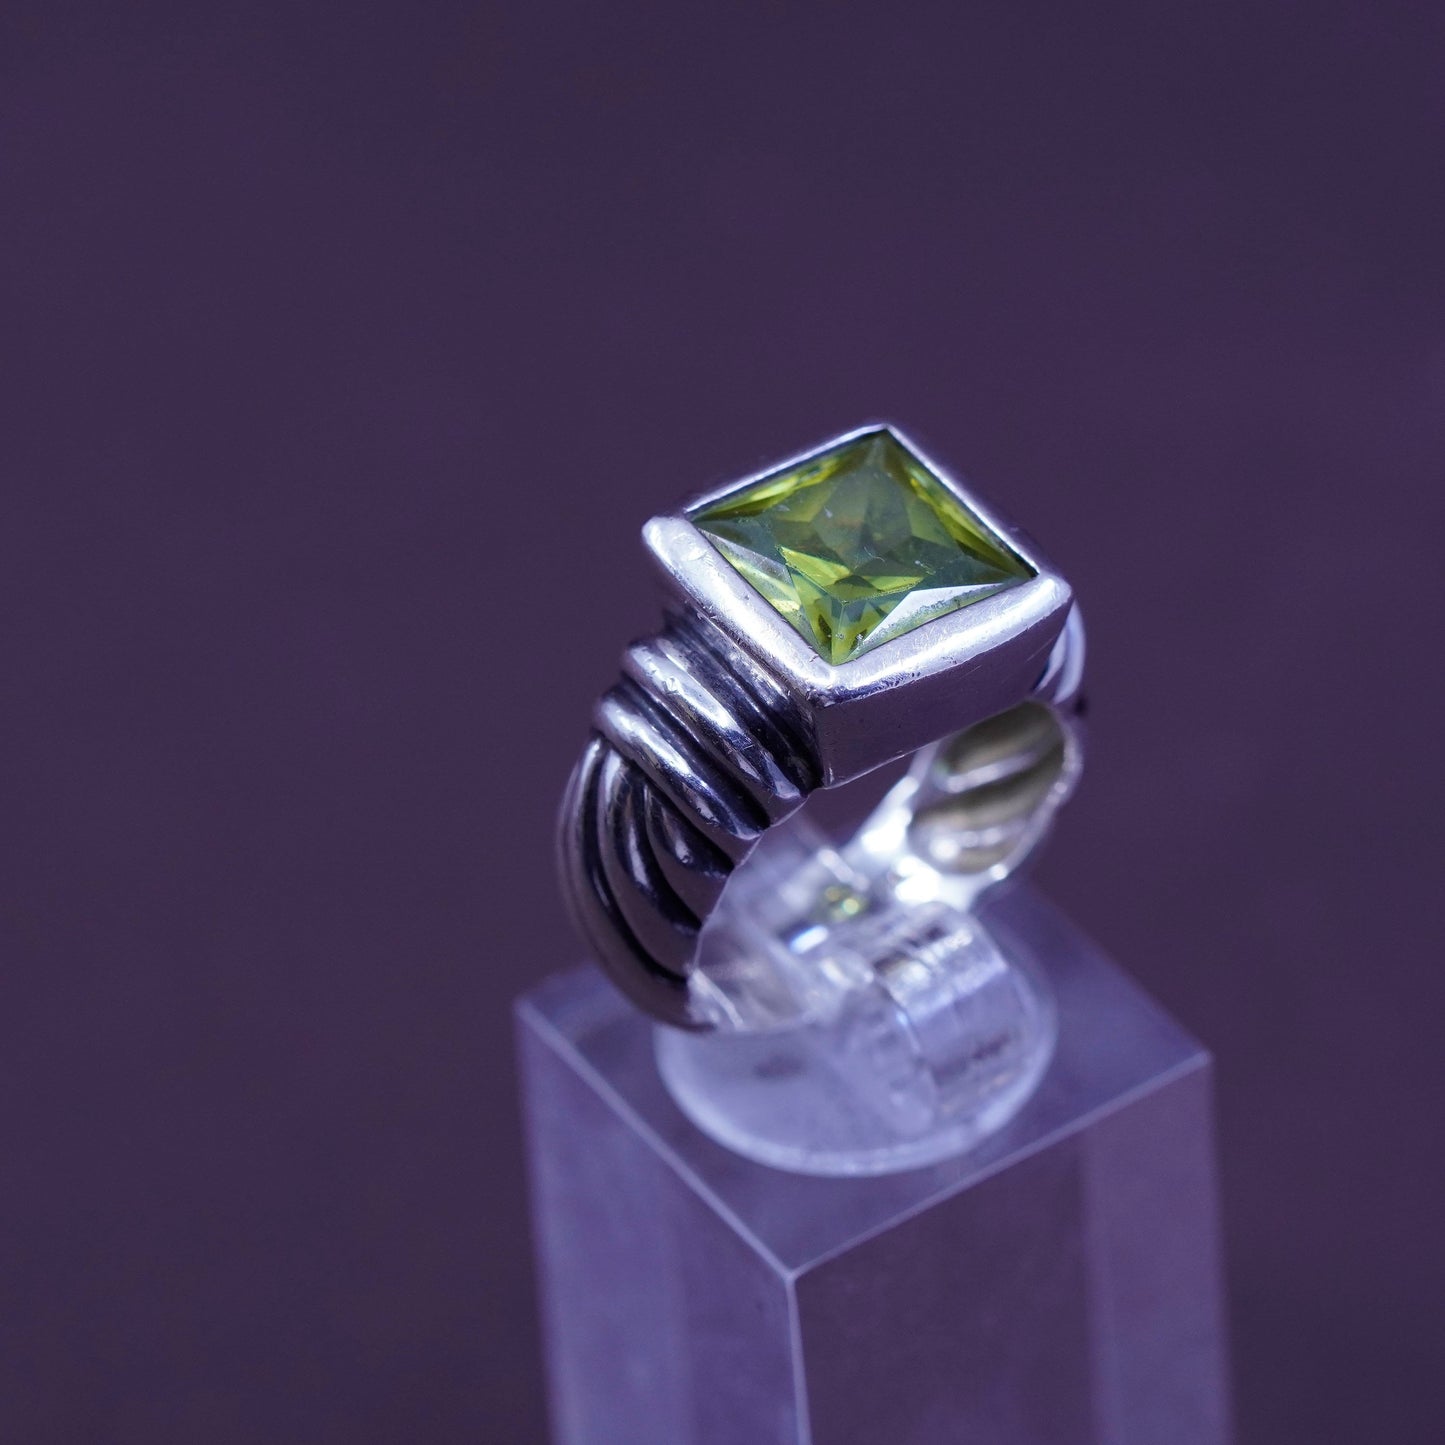 Size 7, vintage Sterling 925 silver handmade ring with square peridot